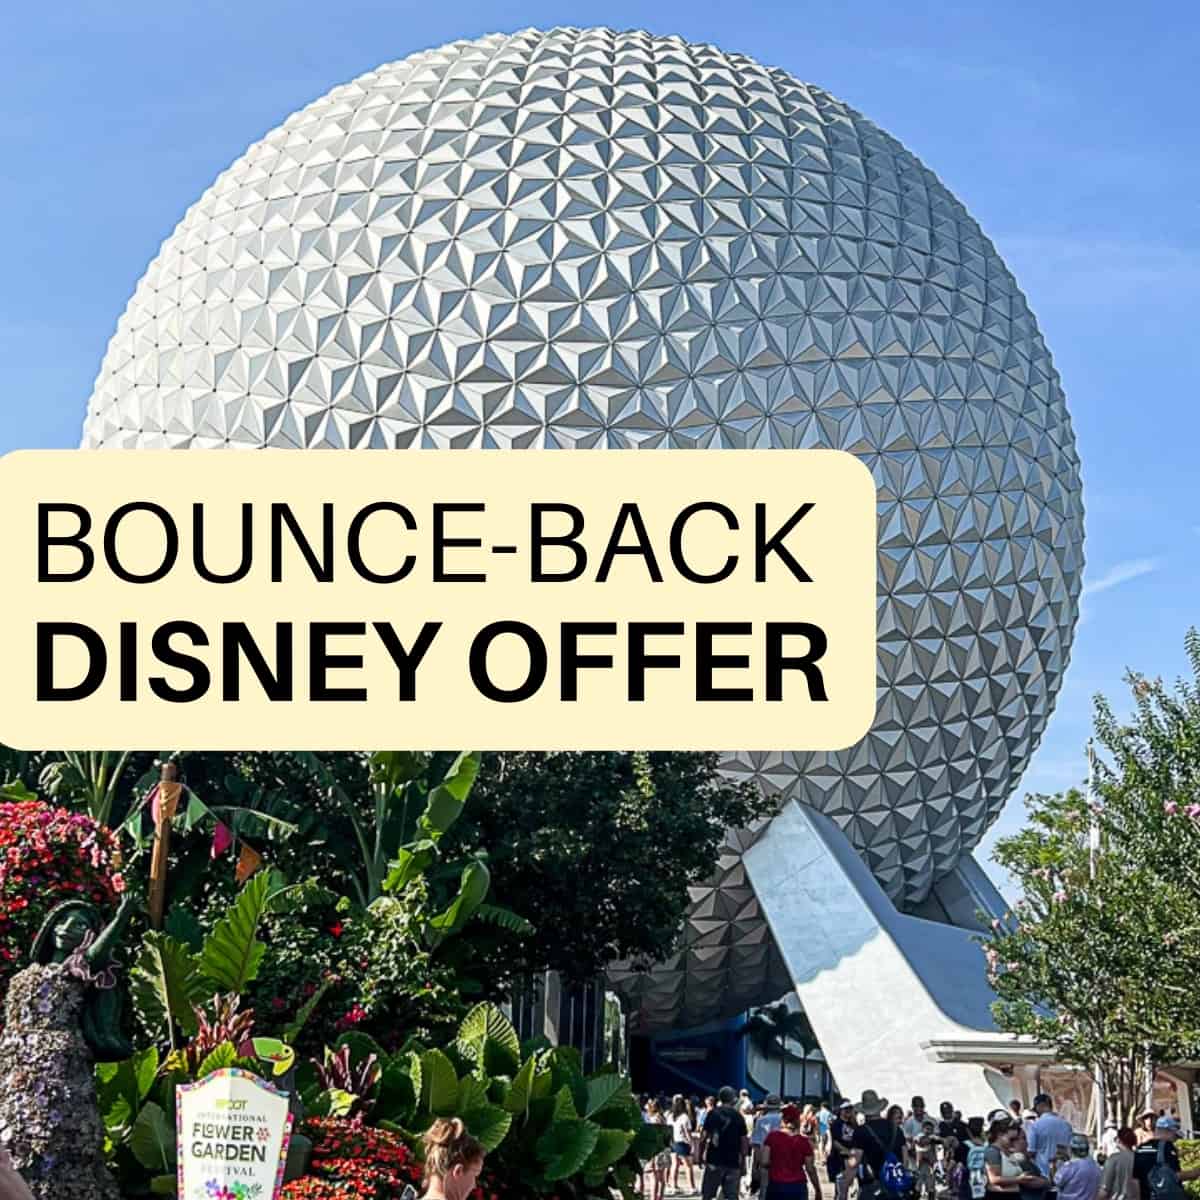 Disney Bounce Back Offer text on image of Disney World Epcot Ball